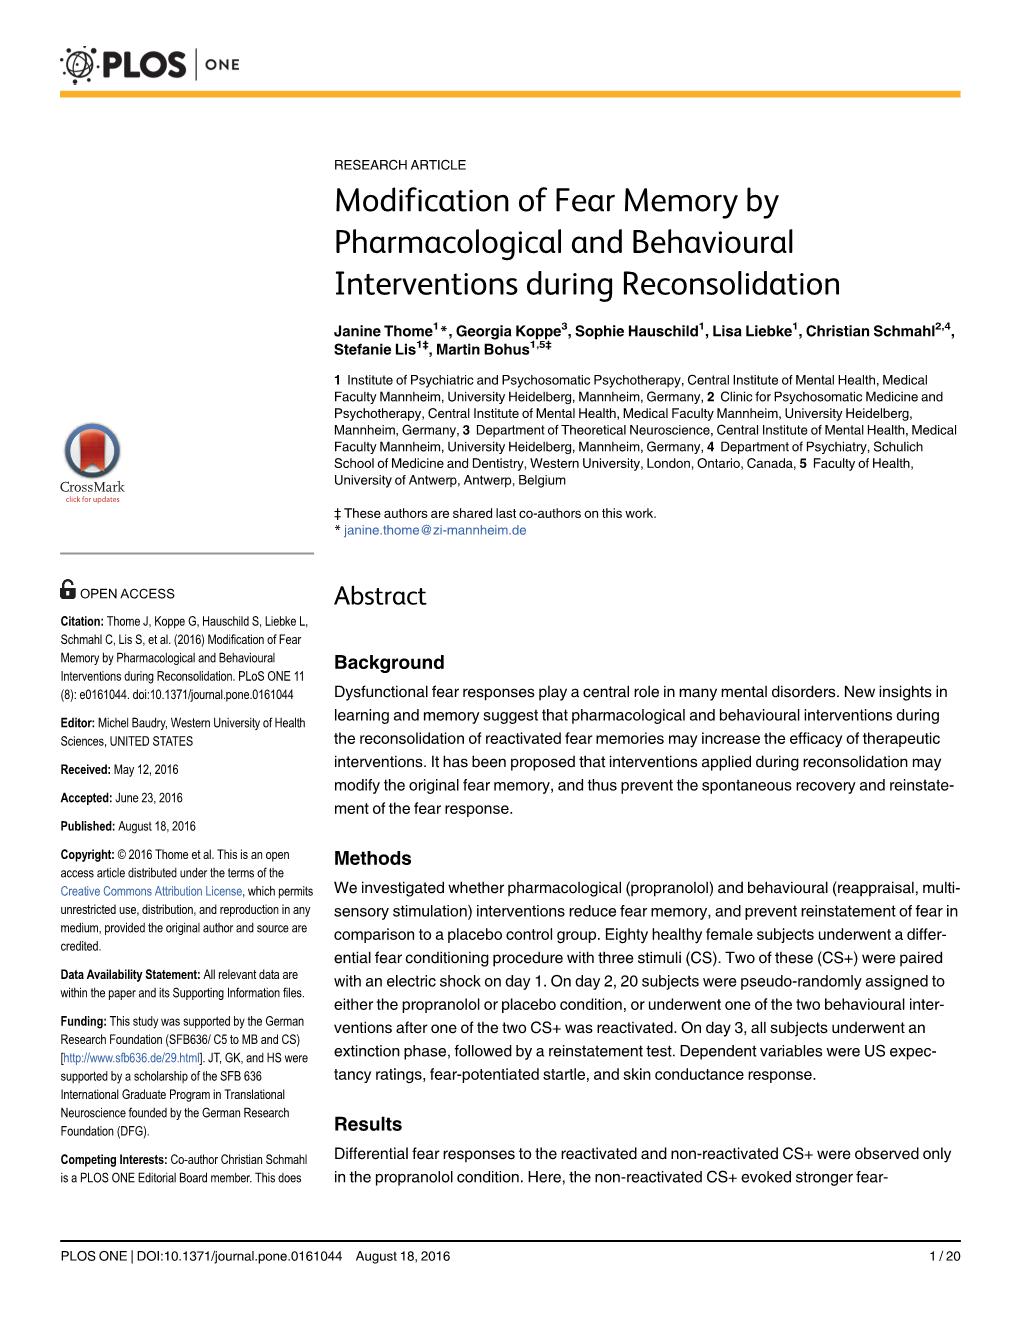 Modification of Fear Memory by Pharmacological and Behavioural Interventions During Reconsolidation